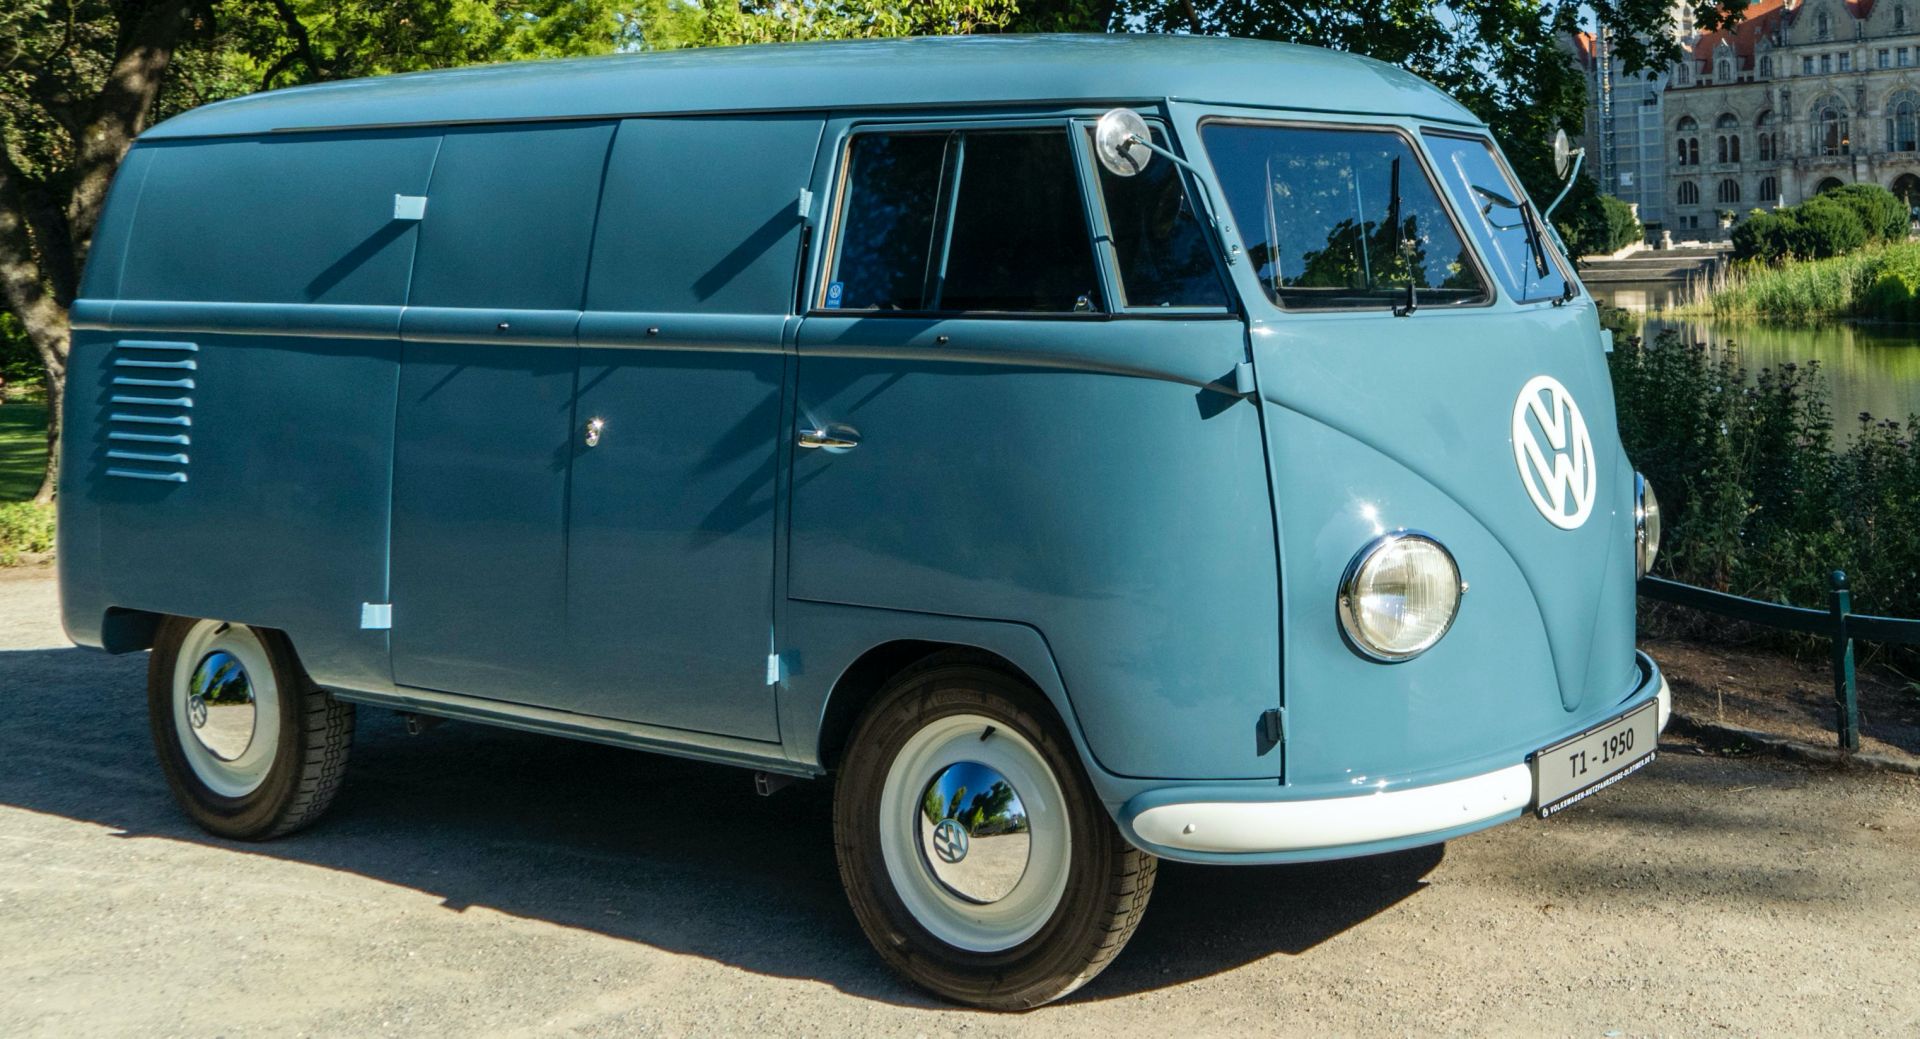 The VW e-Bulli is all kinds of awesome